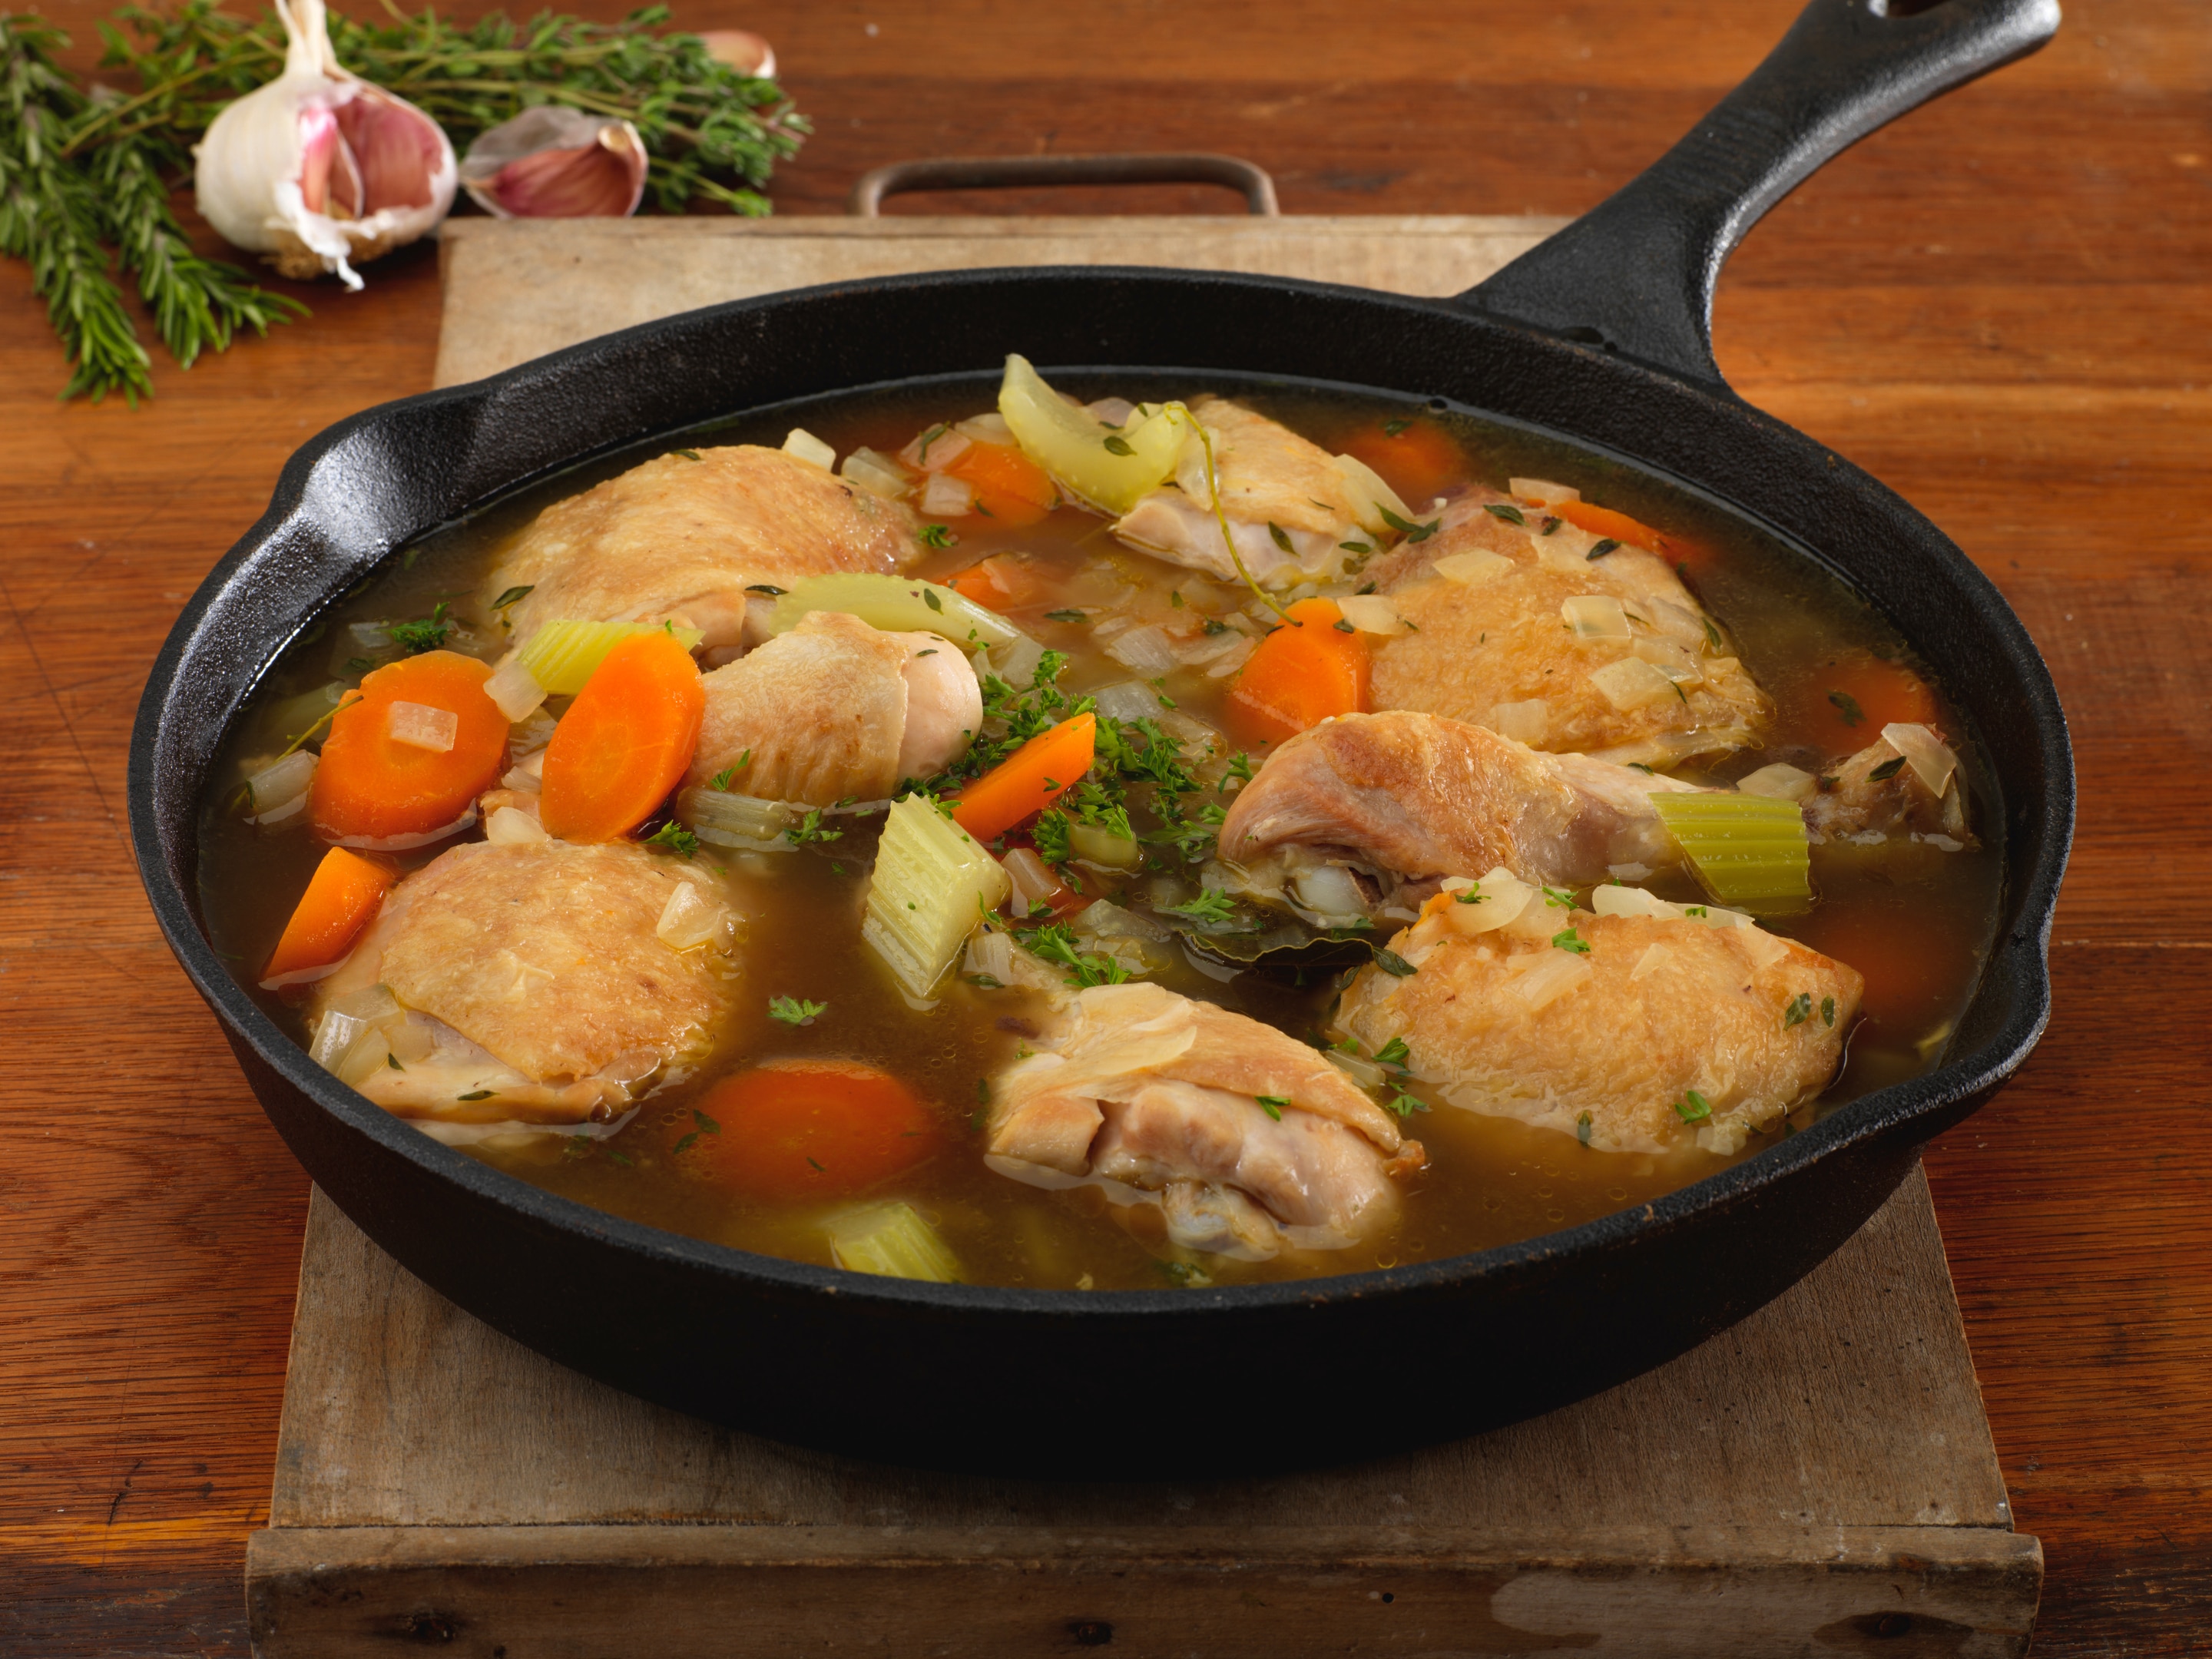 Chicken stew with chicken thighs, carrots, knorr stock, onions and herbs